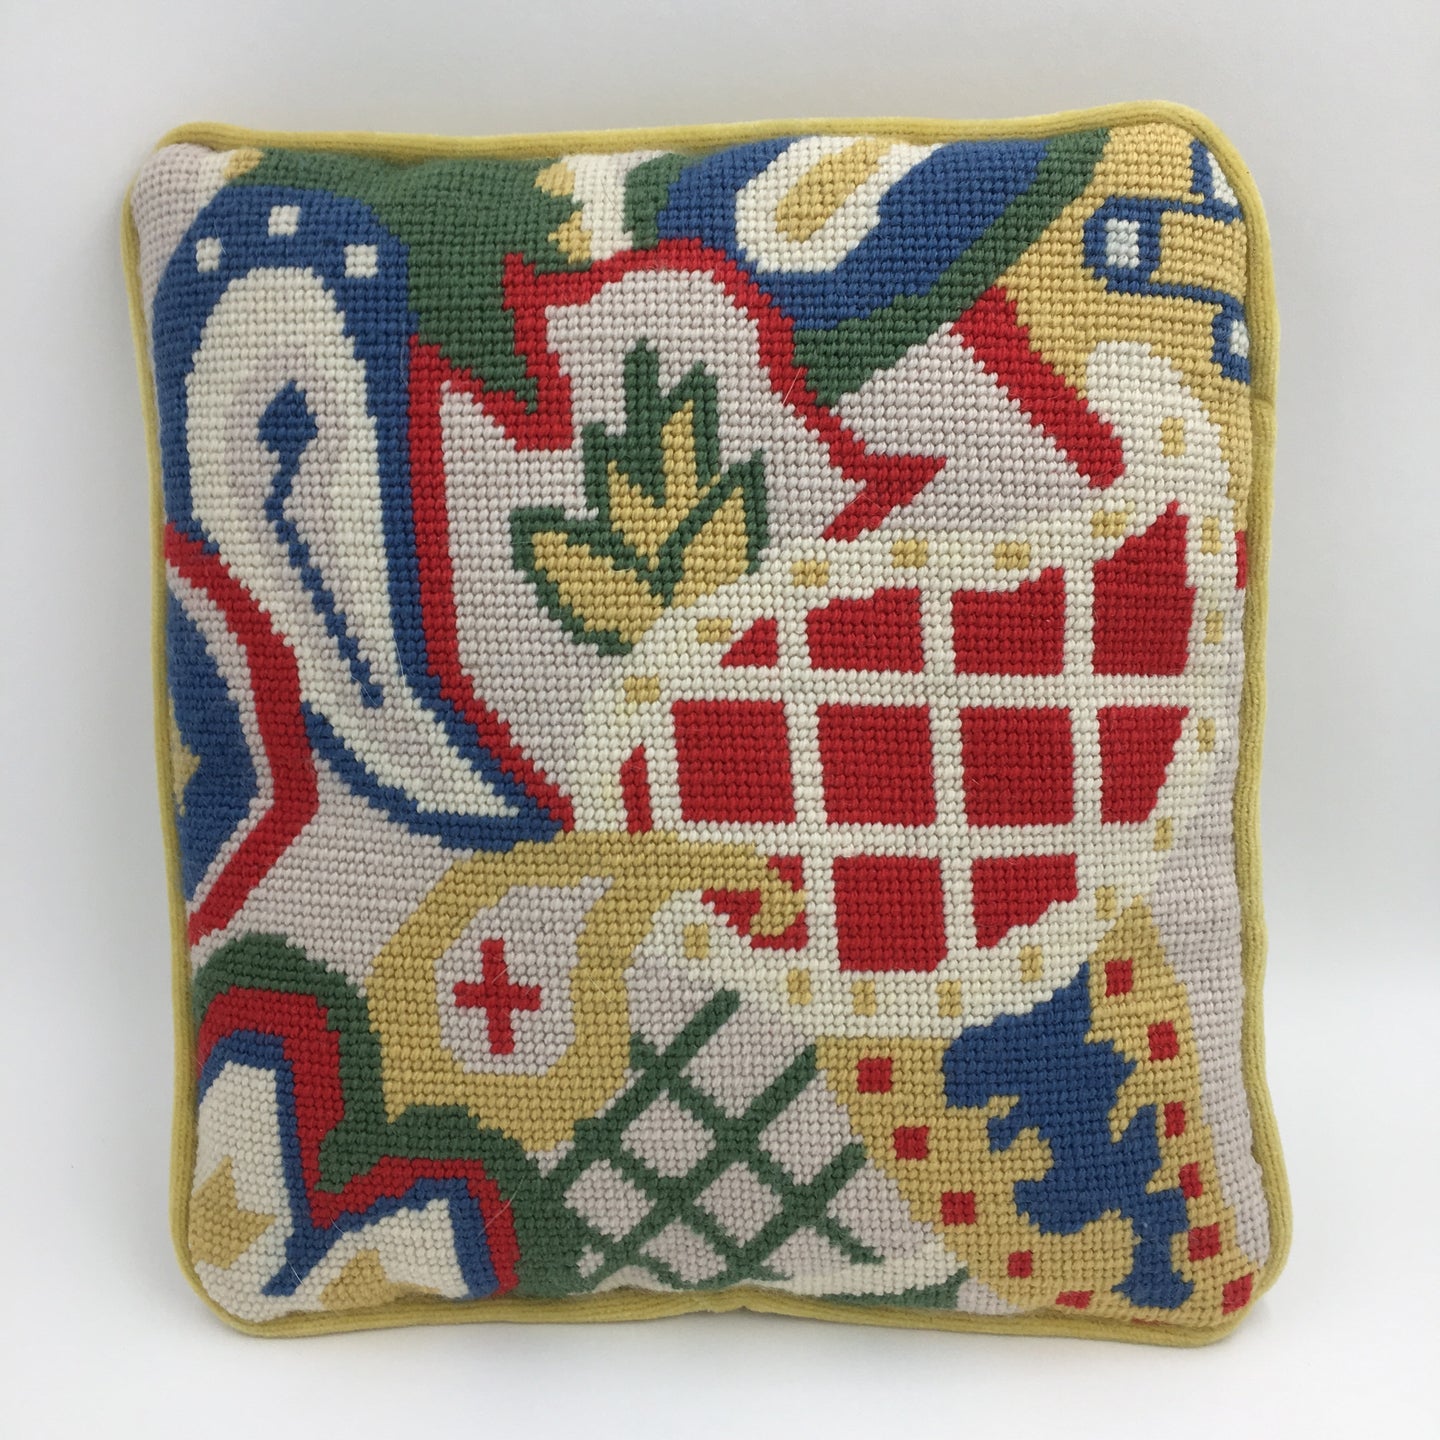 Vintage Hand Stitched Needlepoint Pillow